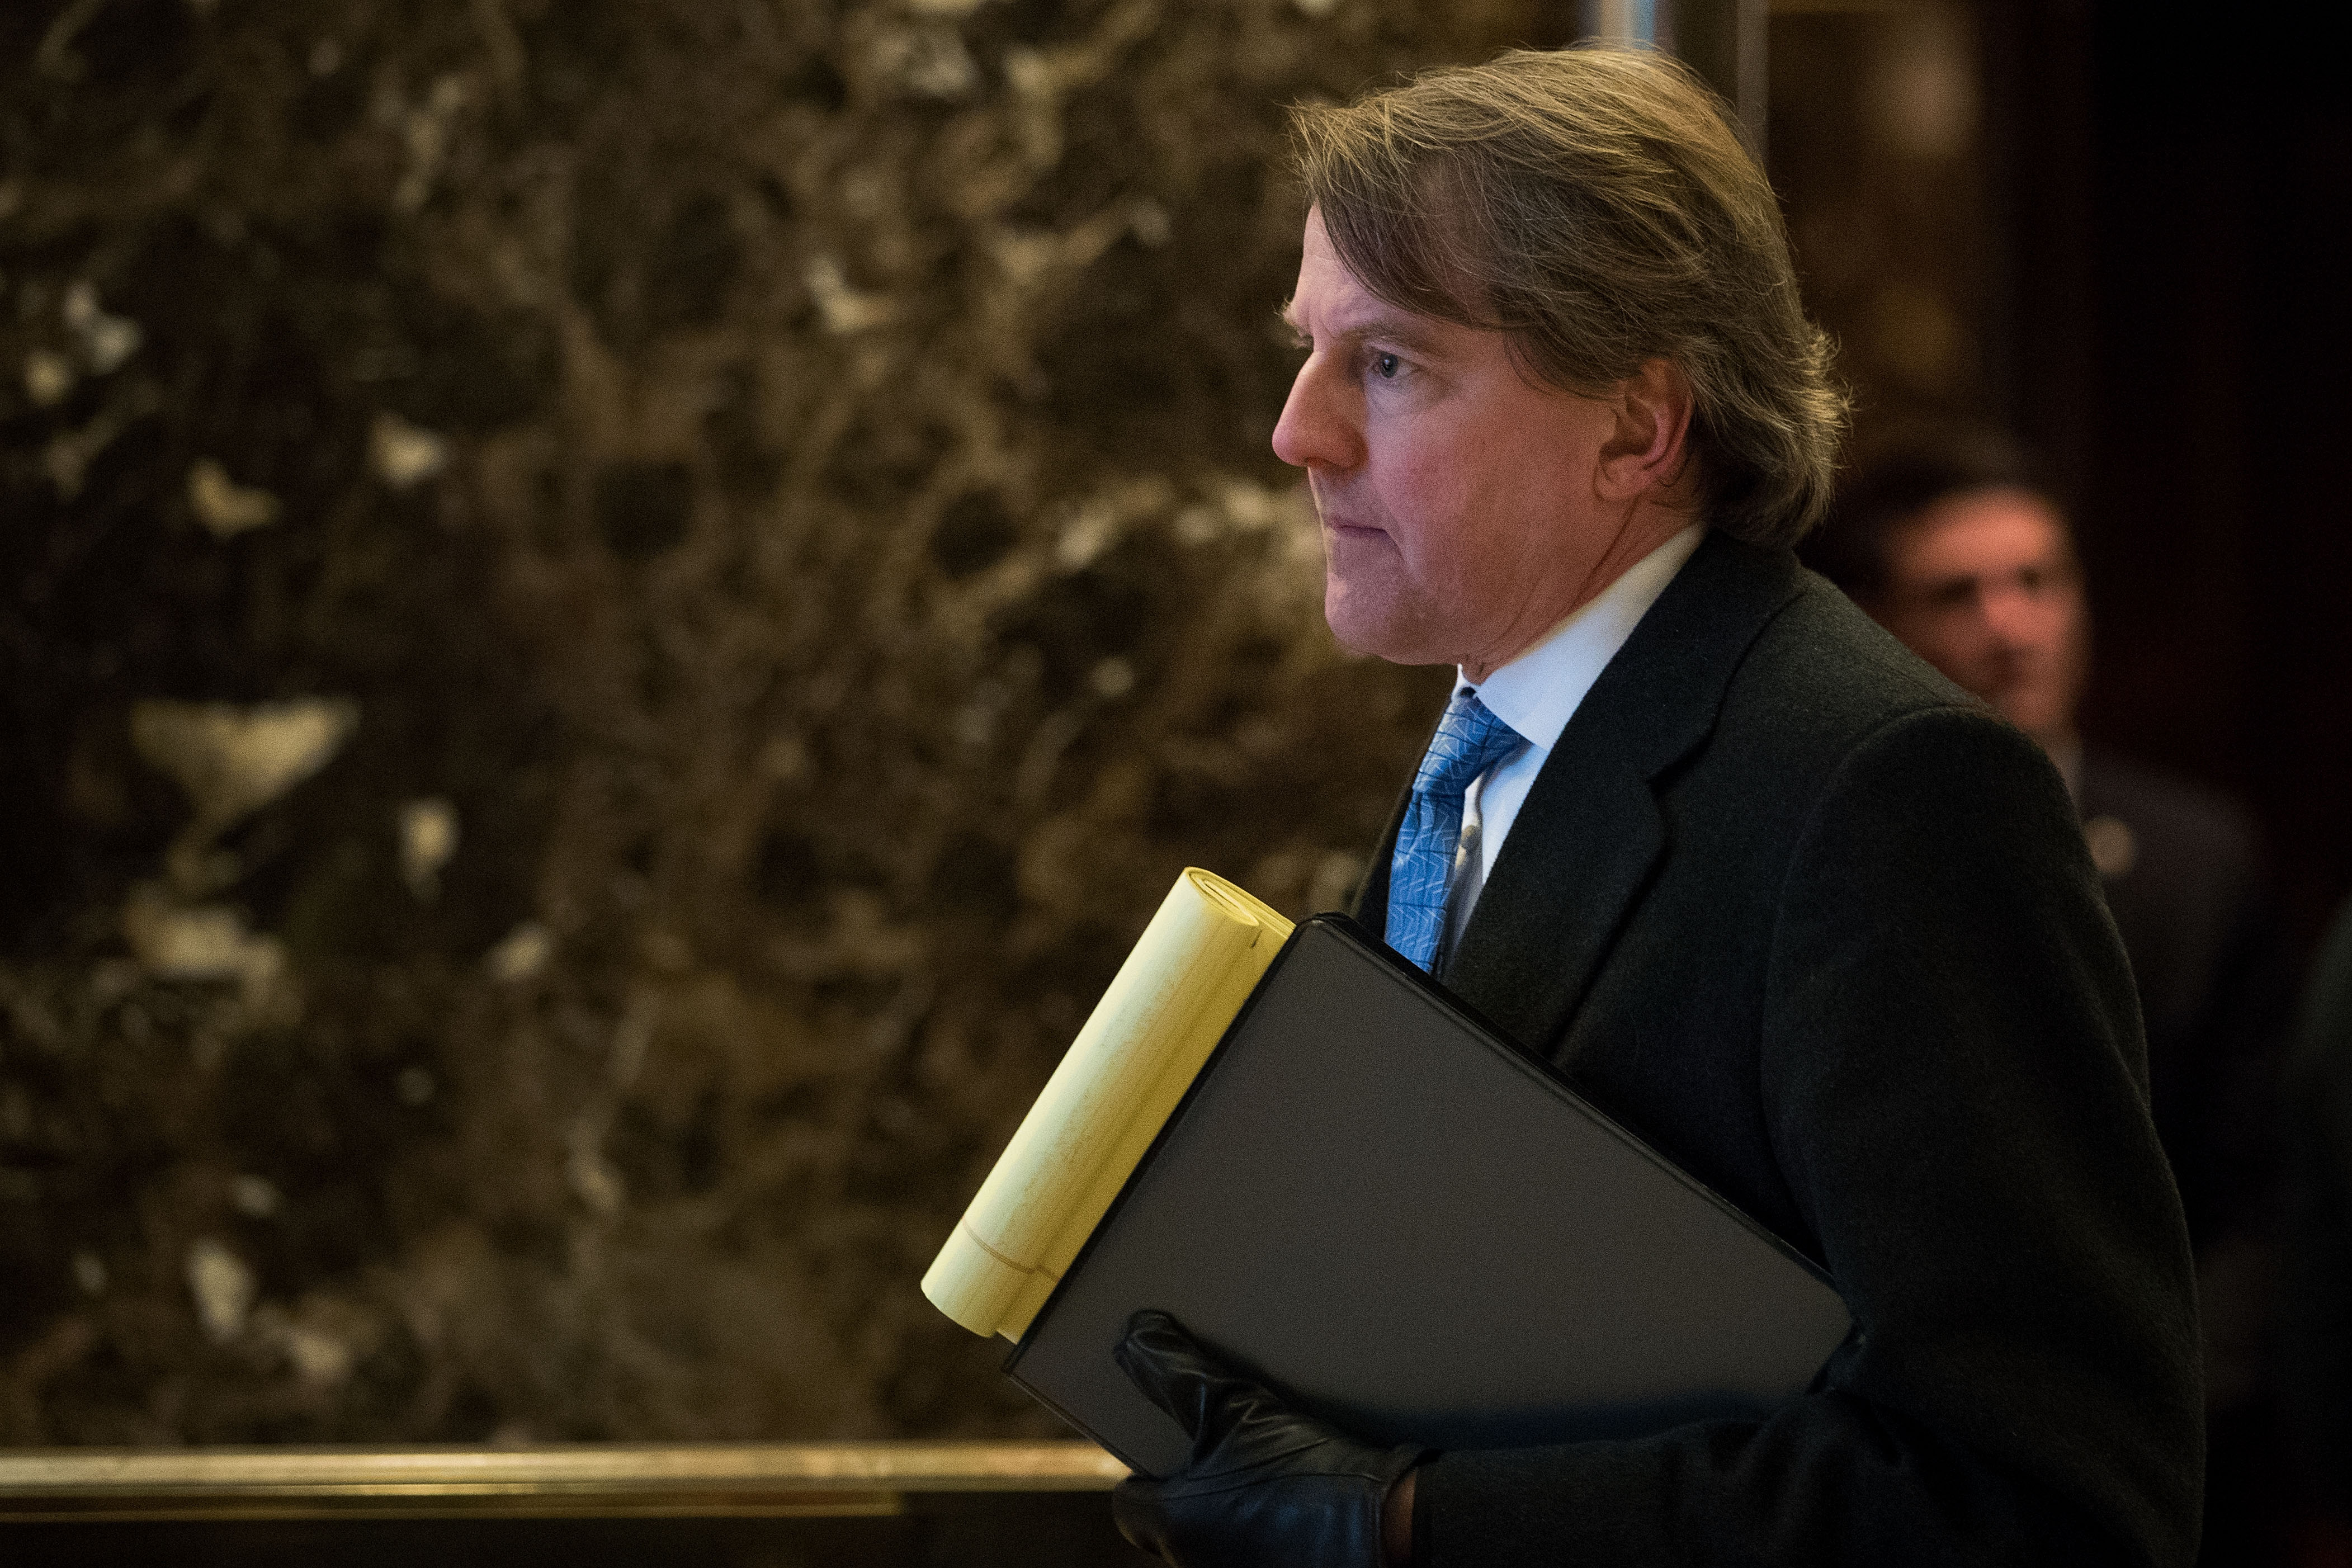 Don McGahn, then the incoming White House Counsel, arrives at Trump Tower in New York City on January 9, 2017. (Drew Angerer/Getty Images)